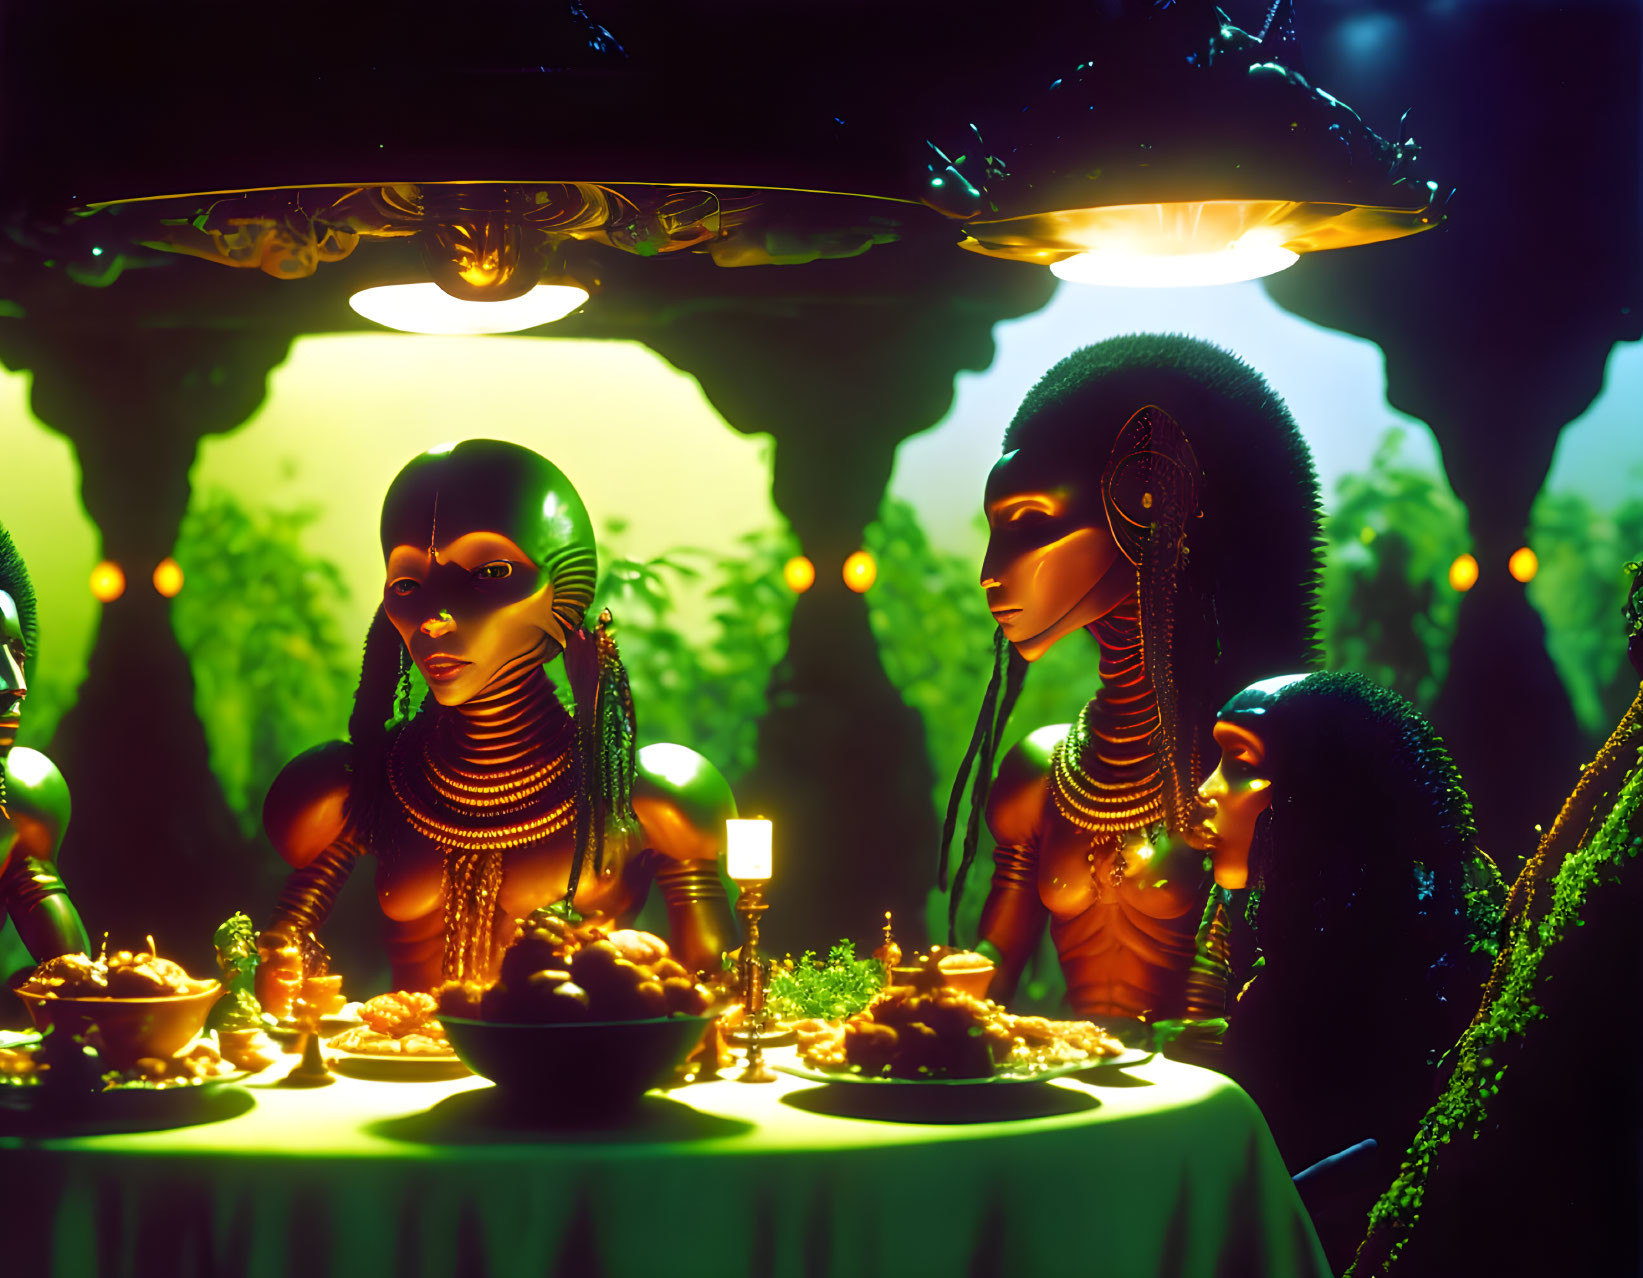 Aliens have a dinner with a local tribes in Latin 